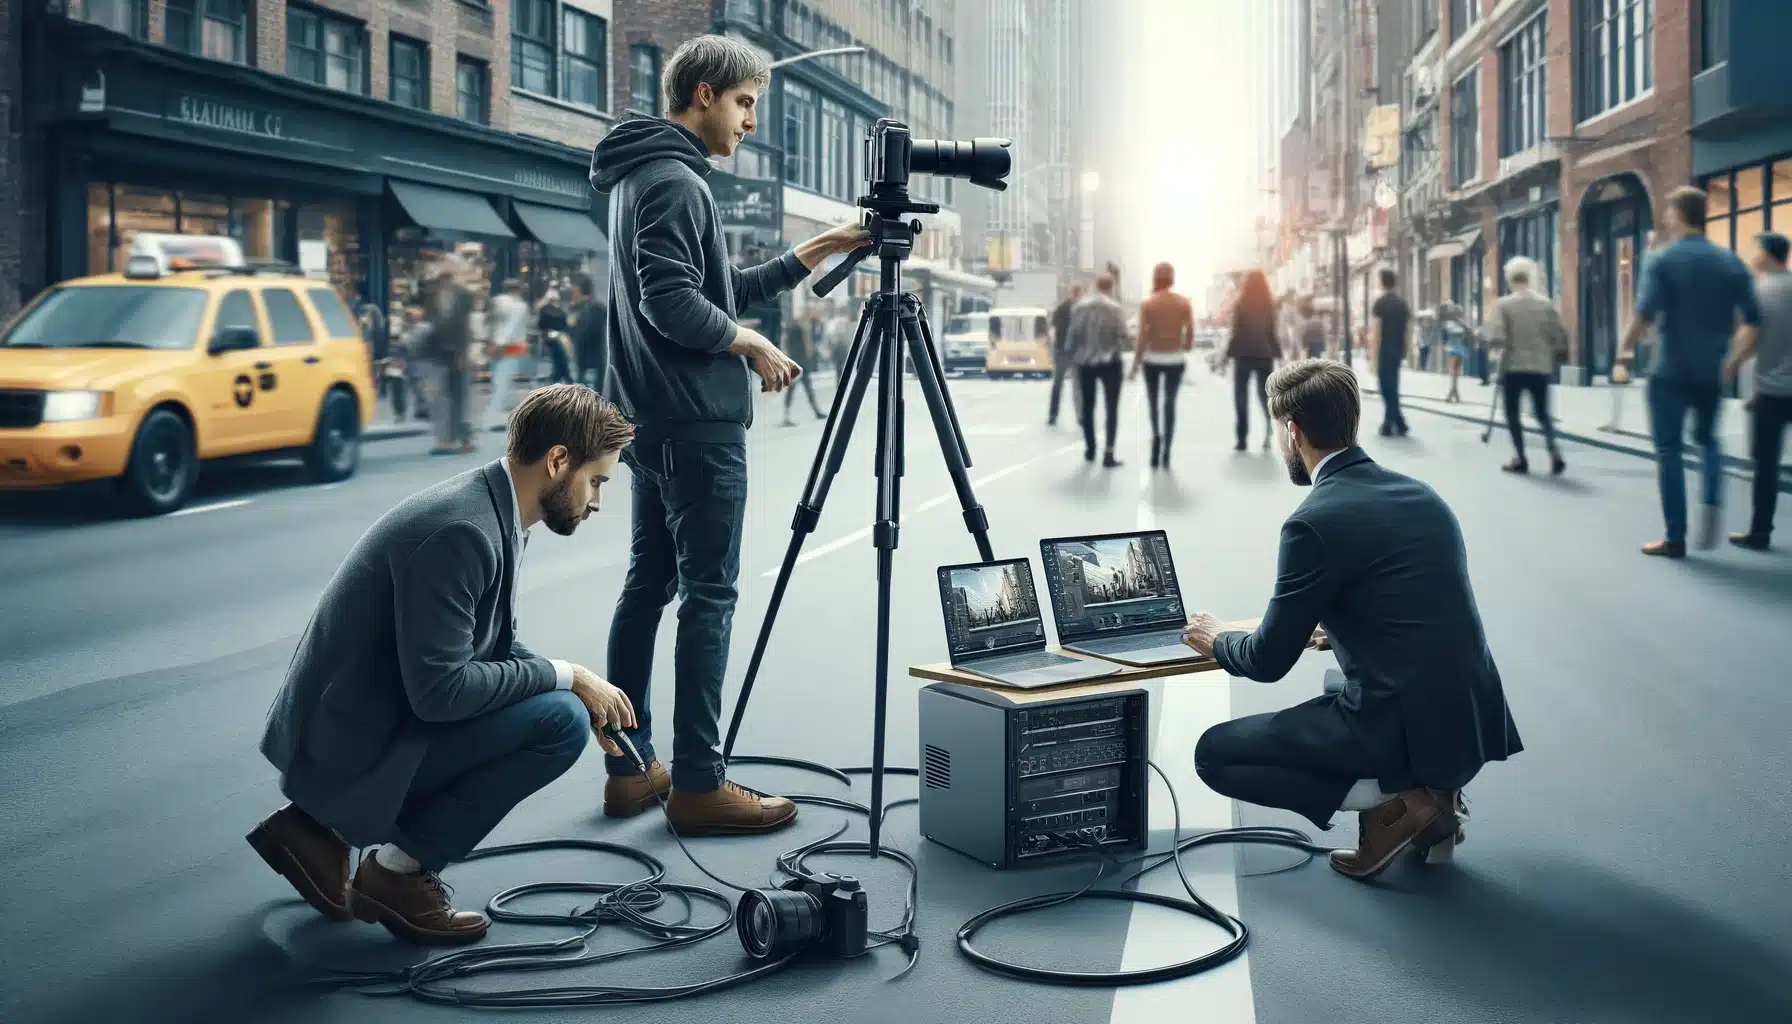 Three professionals setting up a camera tethering system on a busy street, with one adjusting the camera, another managing cables, and a third monitoring the feed on a laptop.